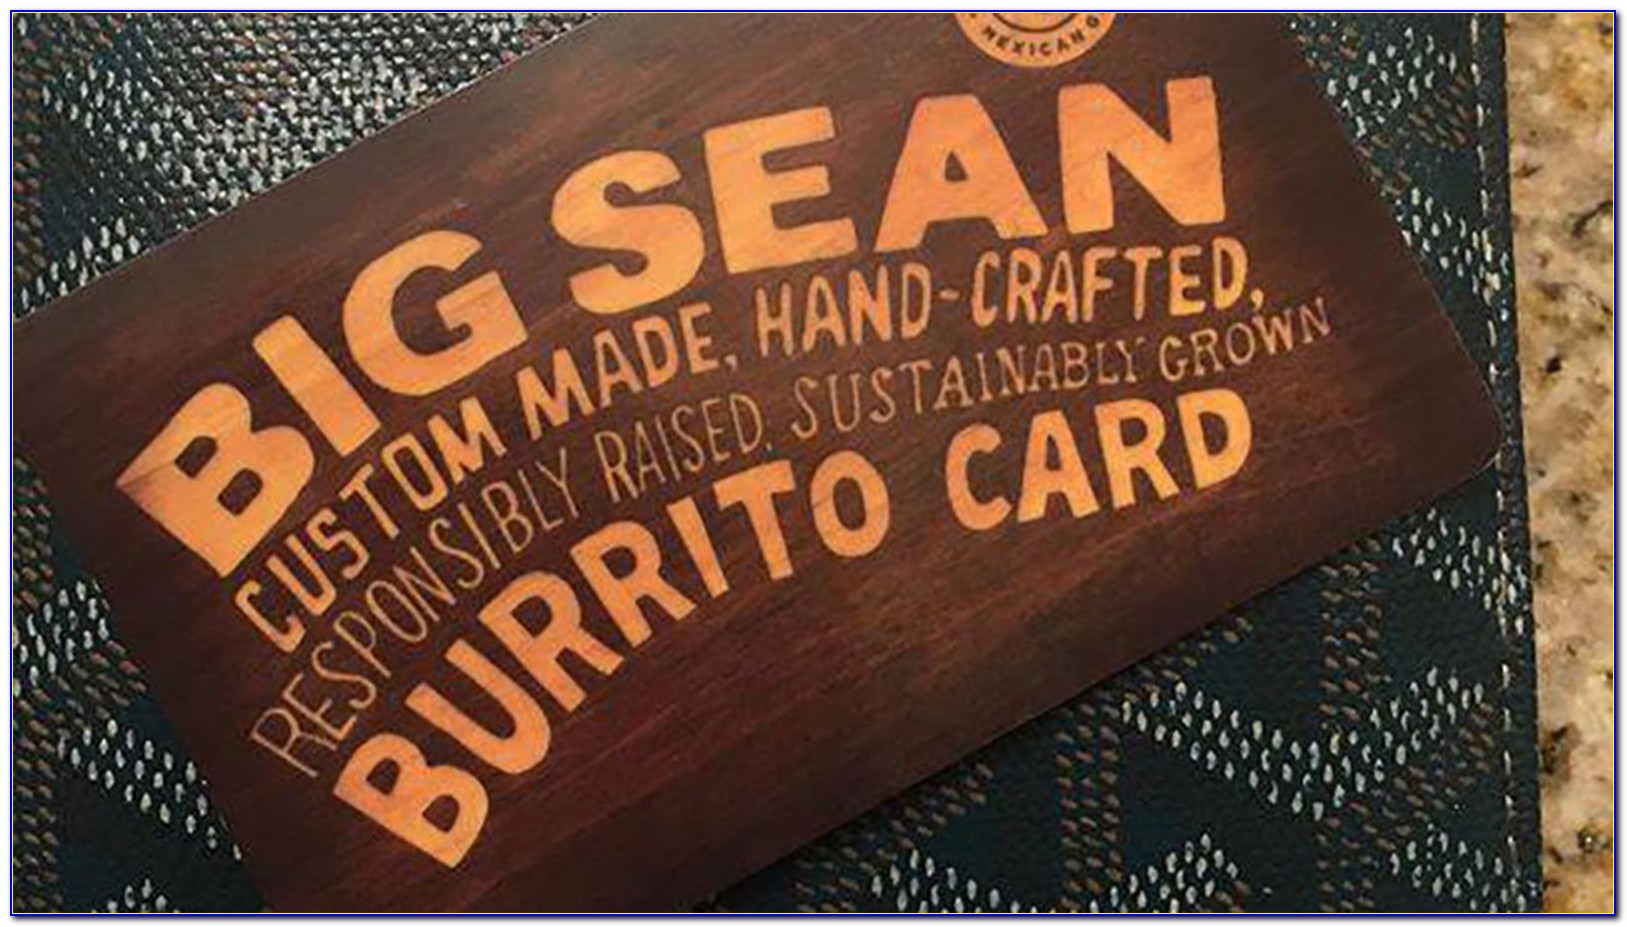 Celebrity Free Chipotle Card